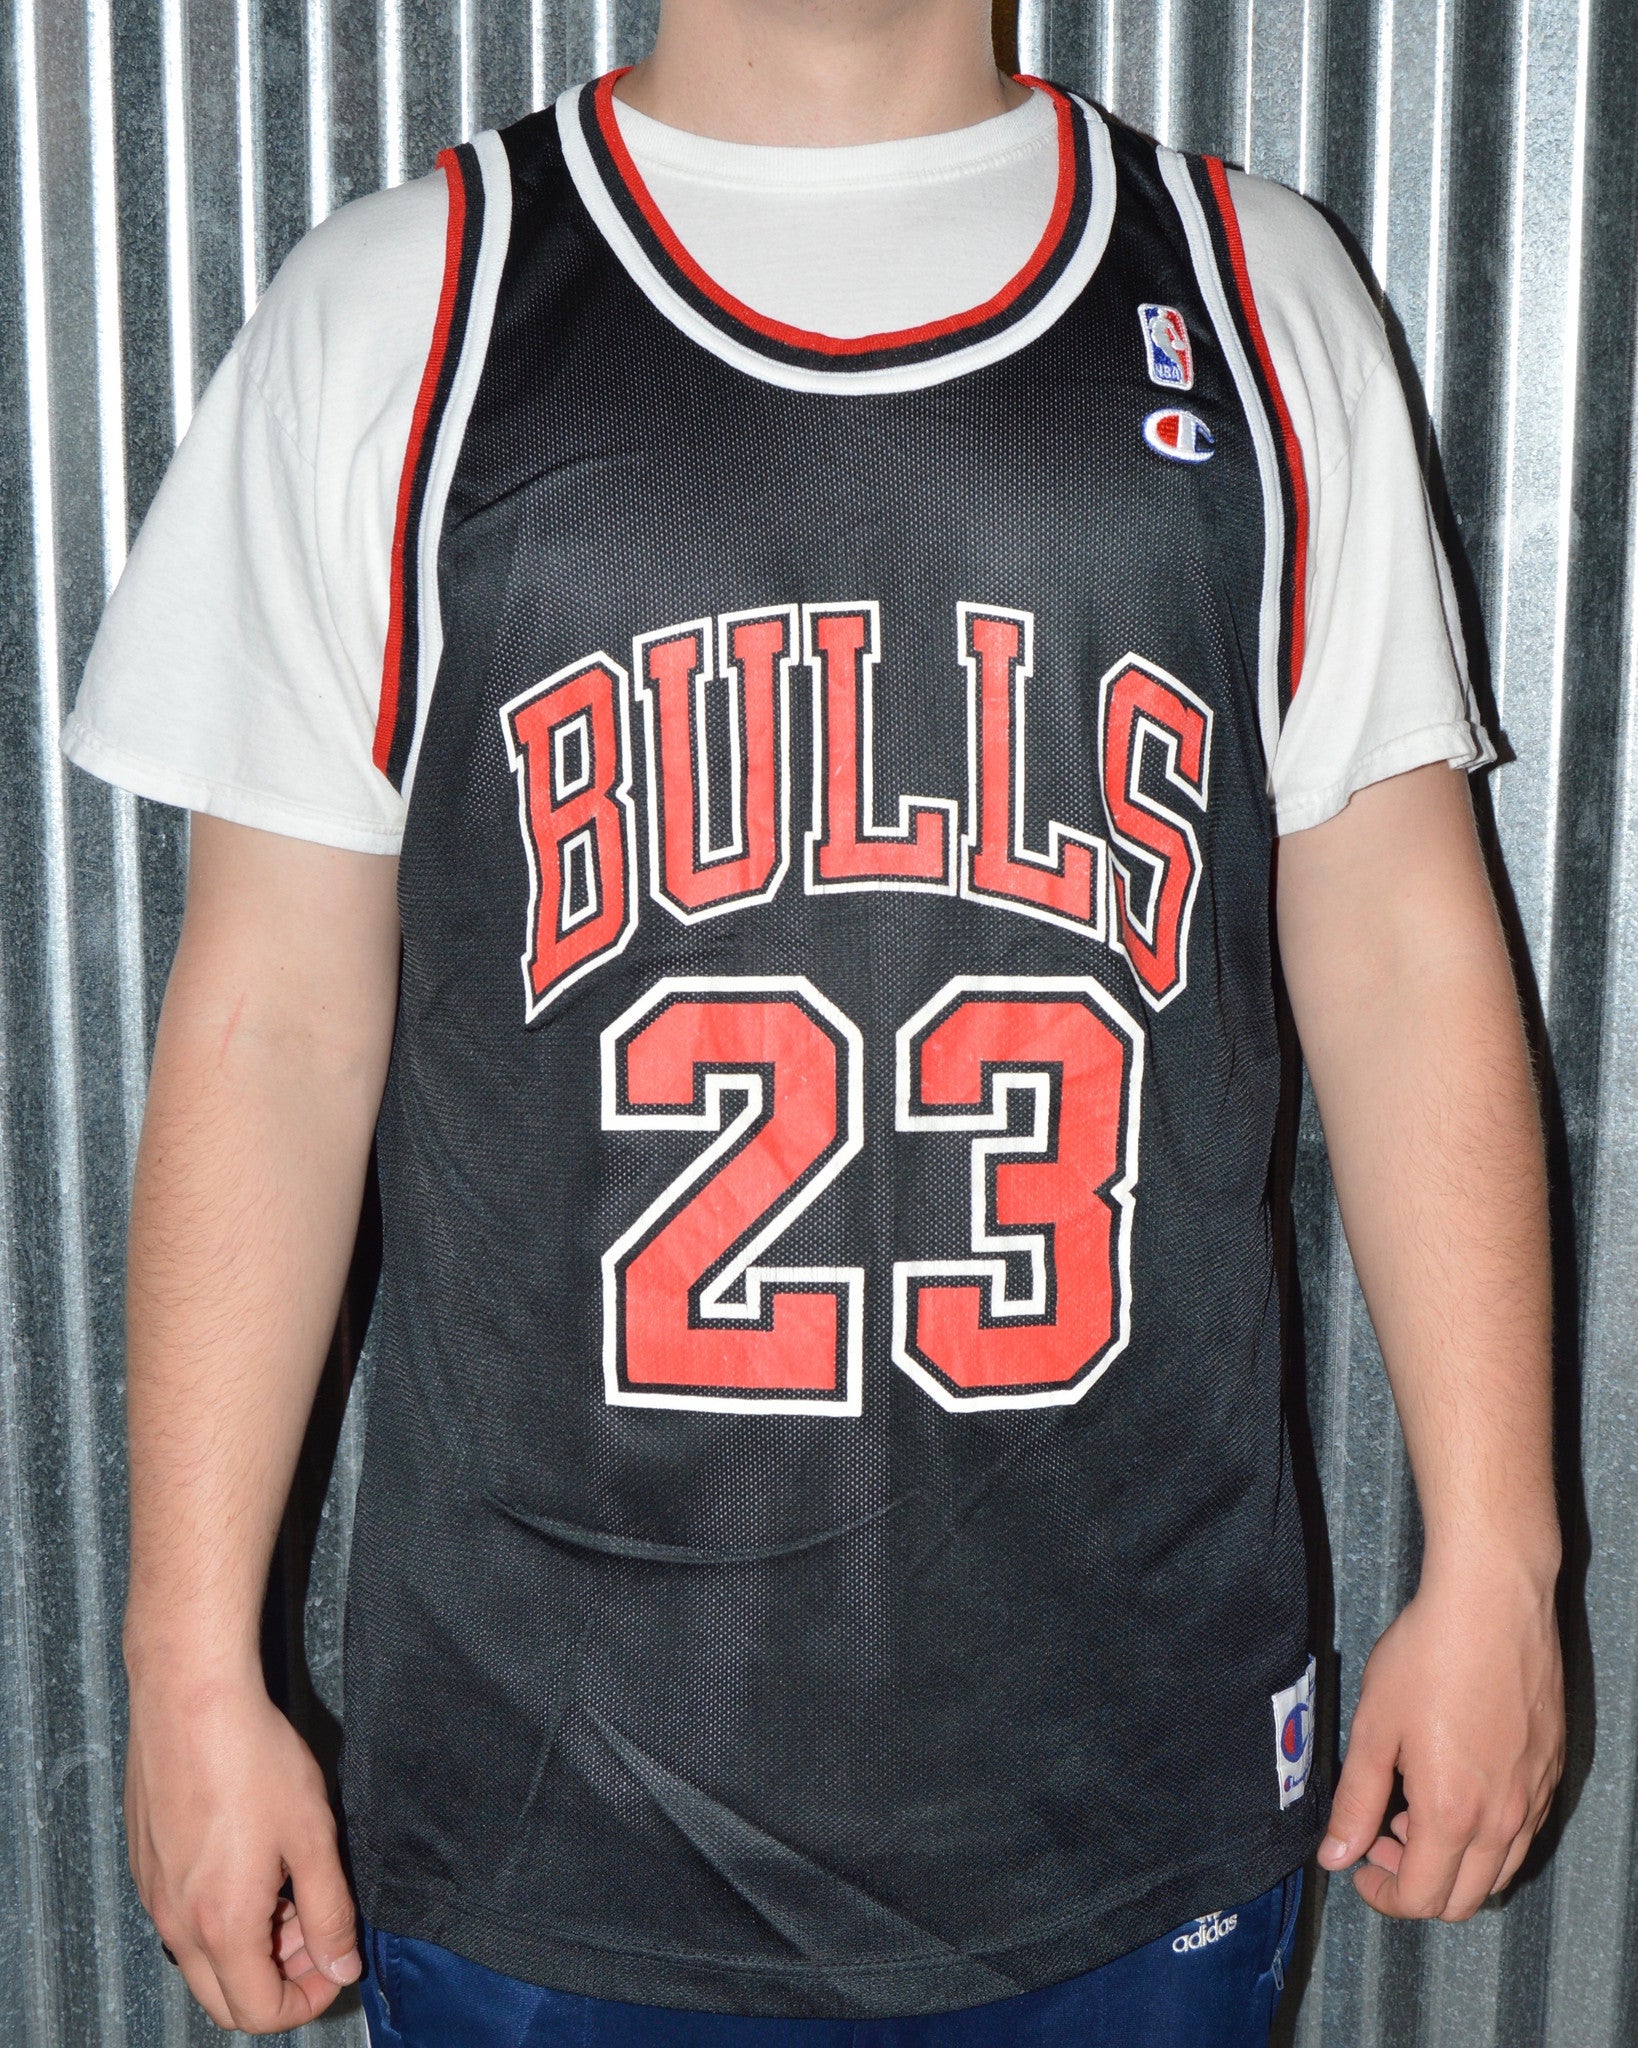 size 48 in basketball jersey